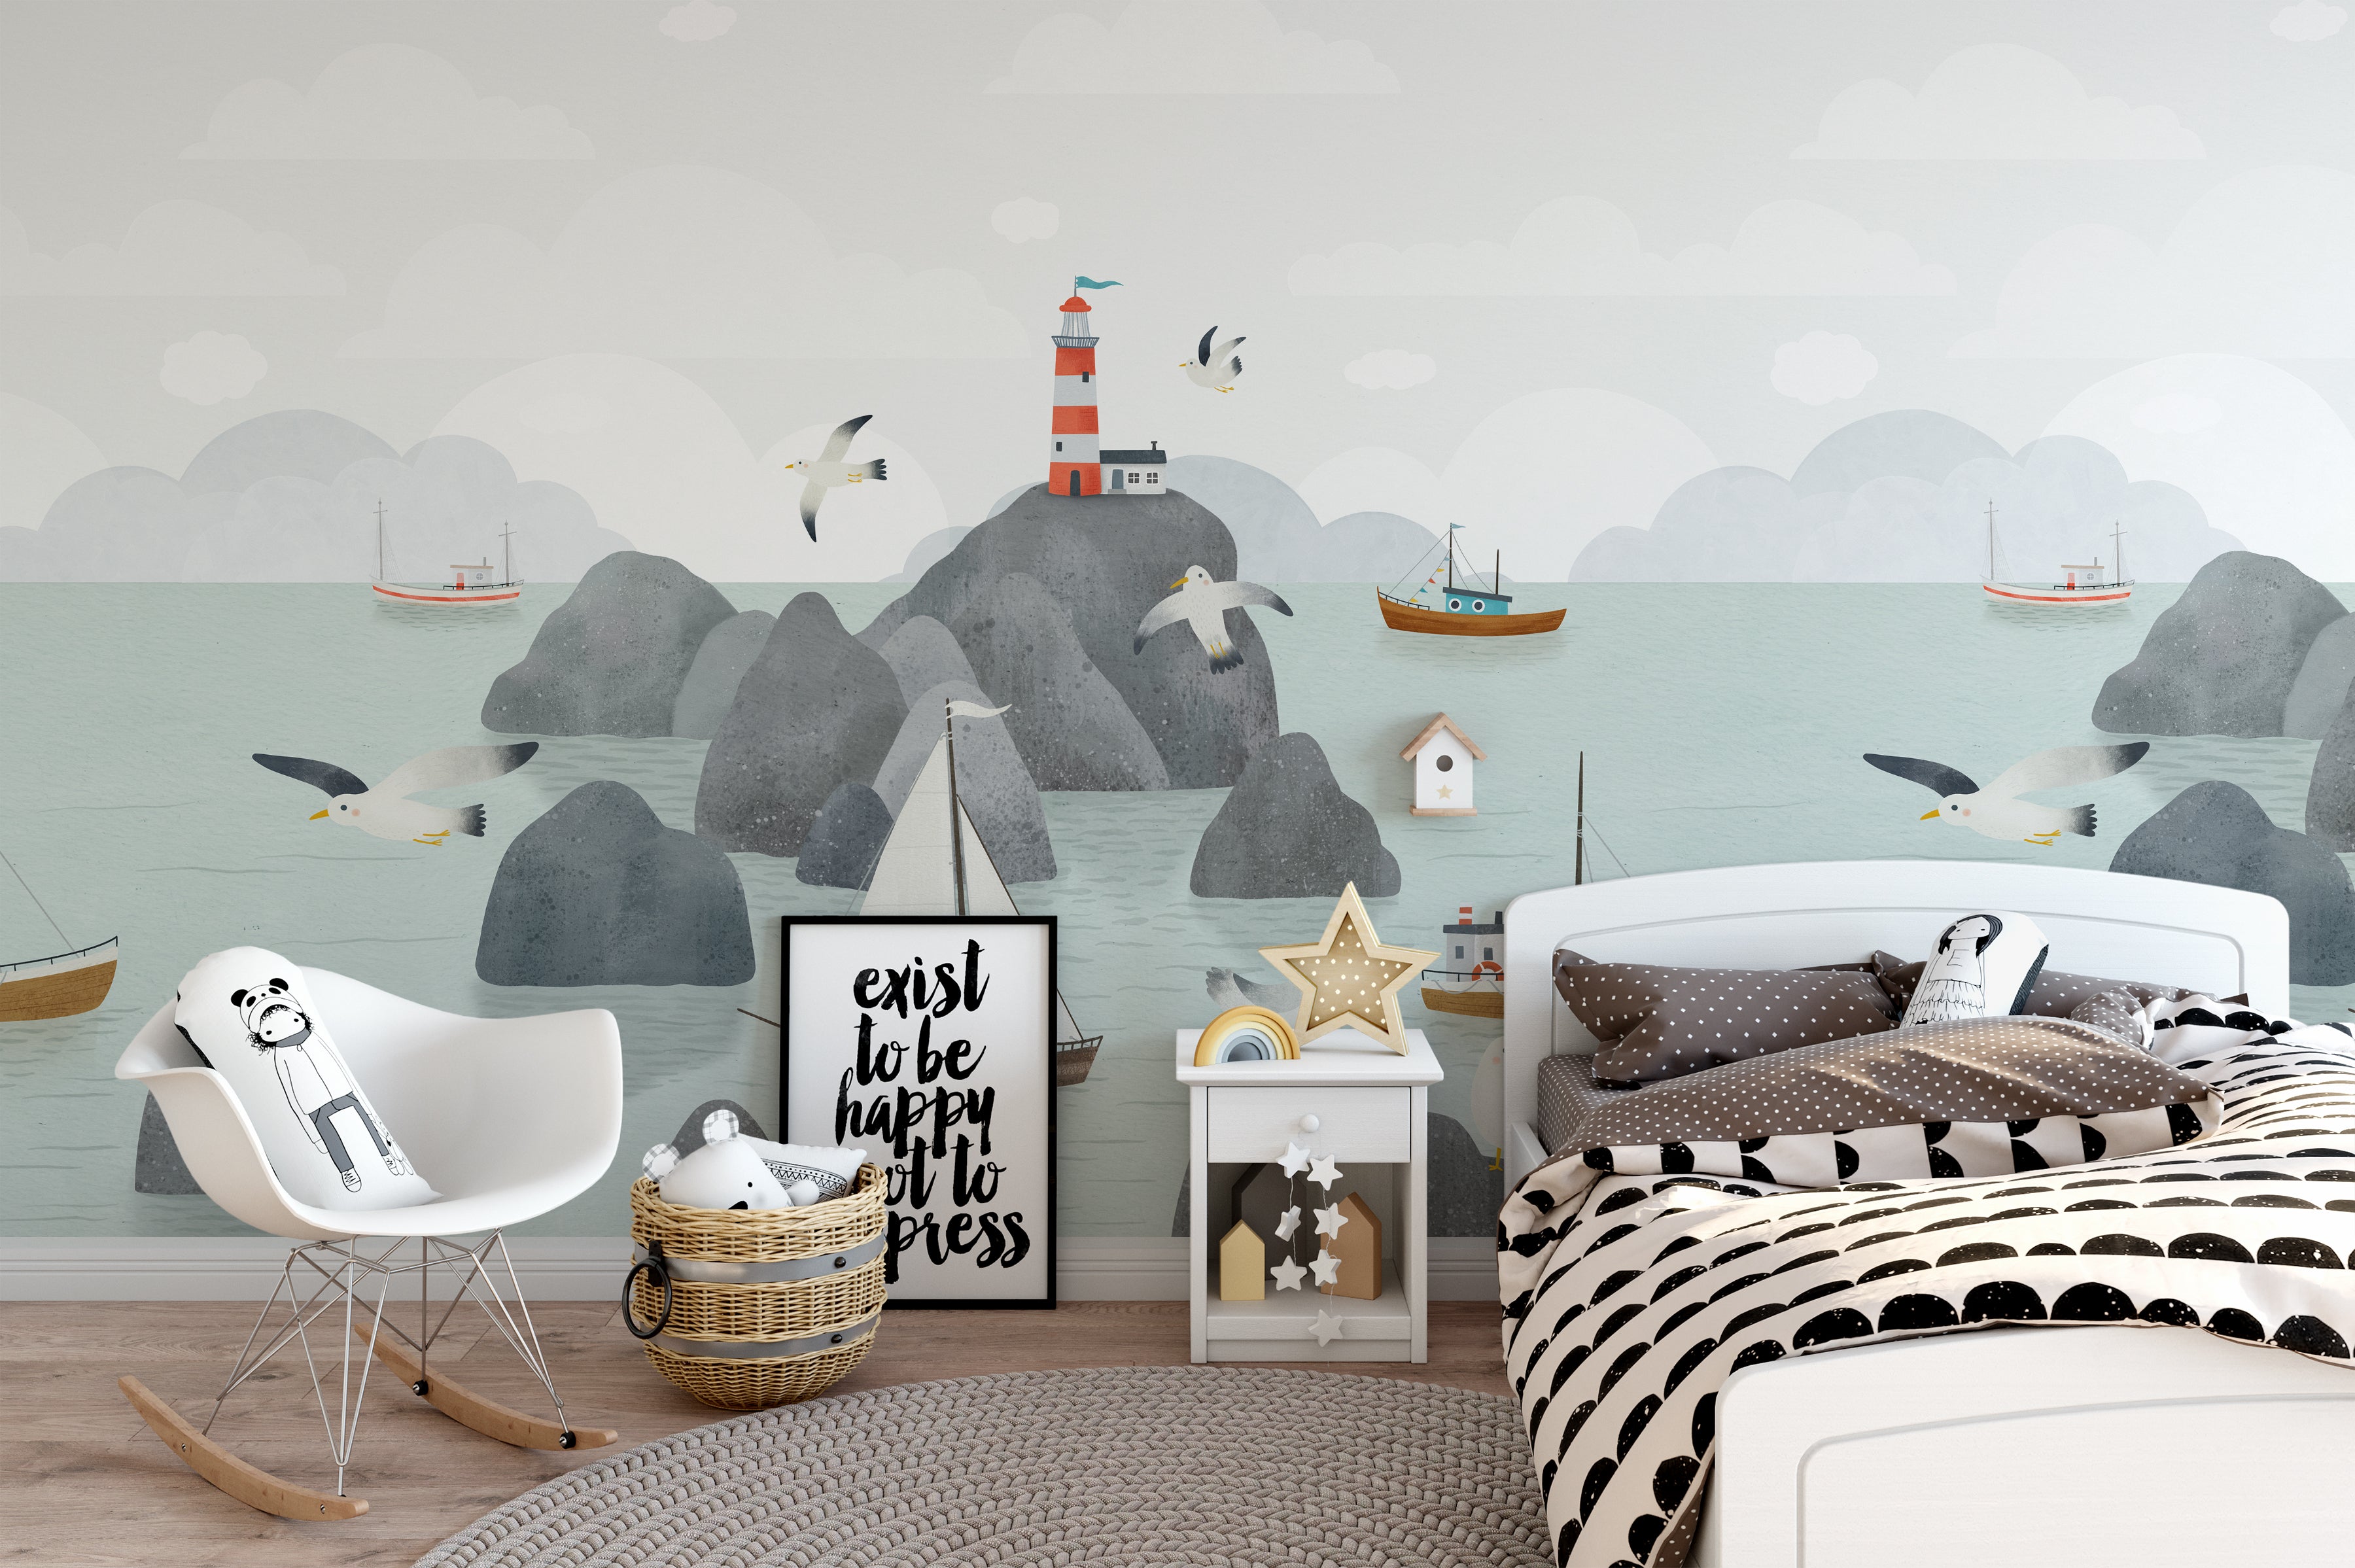 a whimsical children's room with the Kids Nautical Mural Wallpaper creating a charming seaside scene. The wallpaper features soft hues with playful illustrations of sailboats, seagulls, and a lighthouse atop rocky outcrops. The room is styled with a contemporary white bed covered in a black and white striped duvet, a rocking chair with a plush toy, and nautical accents like a star-shaped lamp and decorative sailboat, bringing the joy of a coastal adventure into the space.